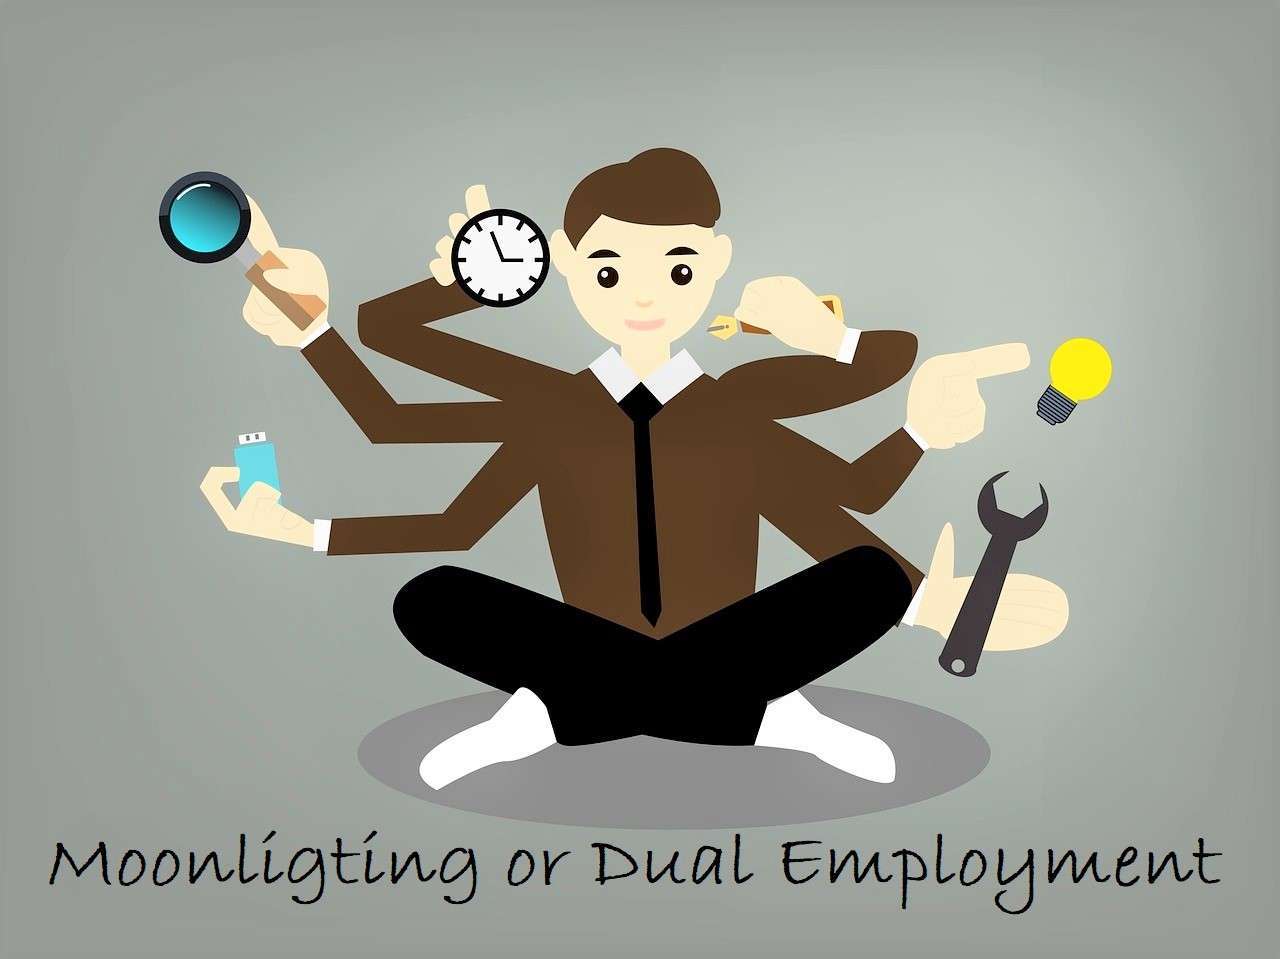 Is Moonlighting or Dual Employment Legal in India